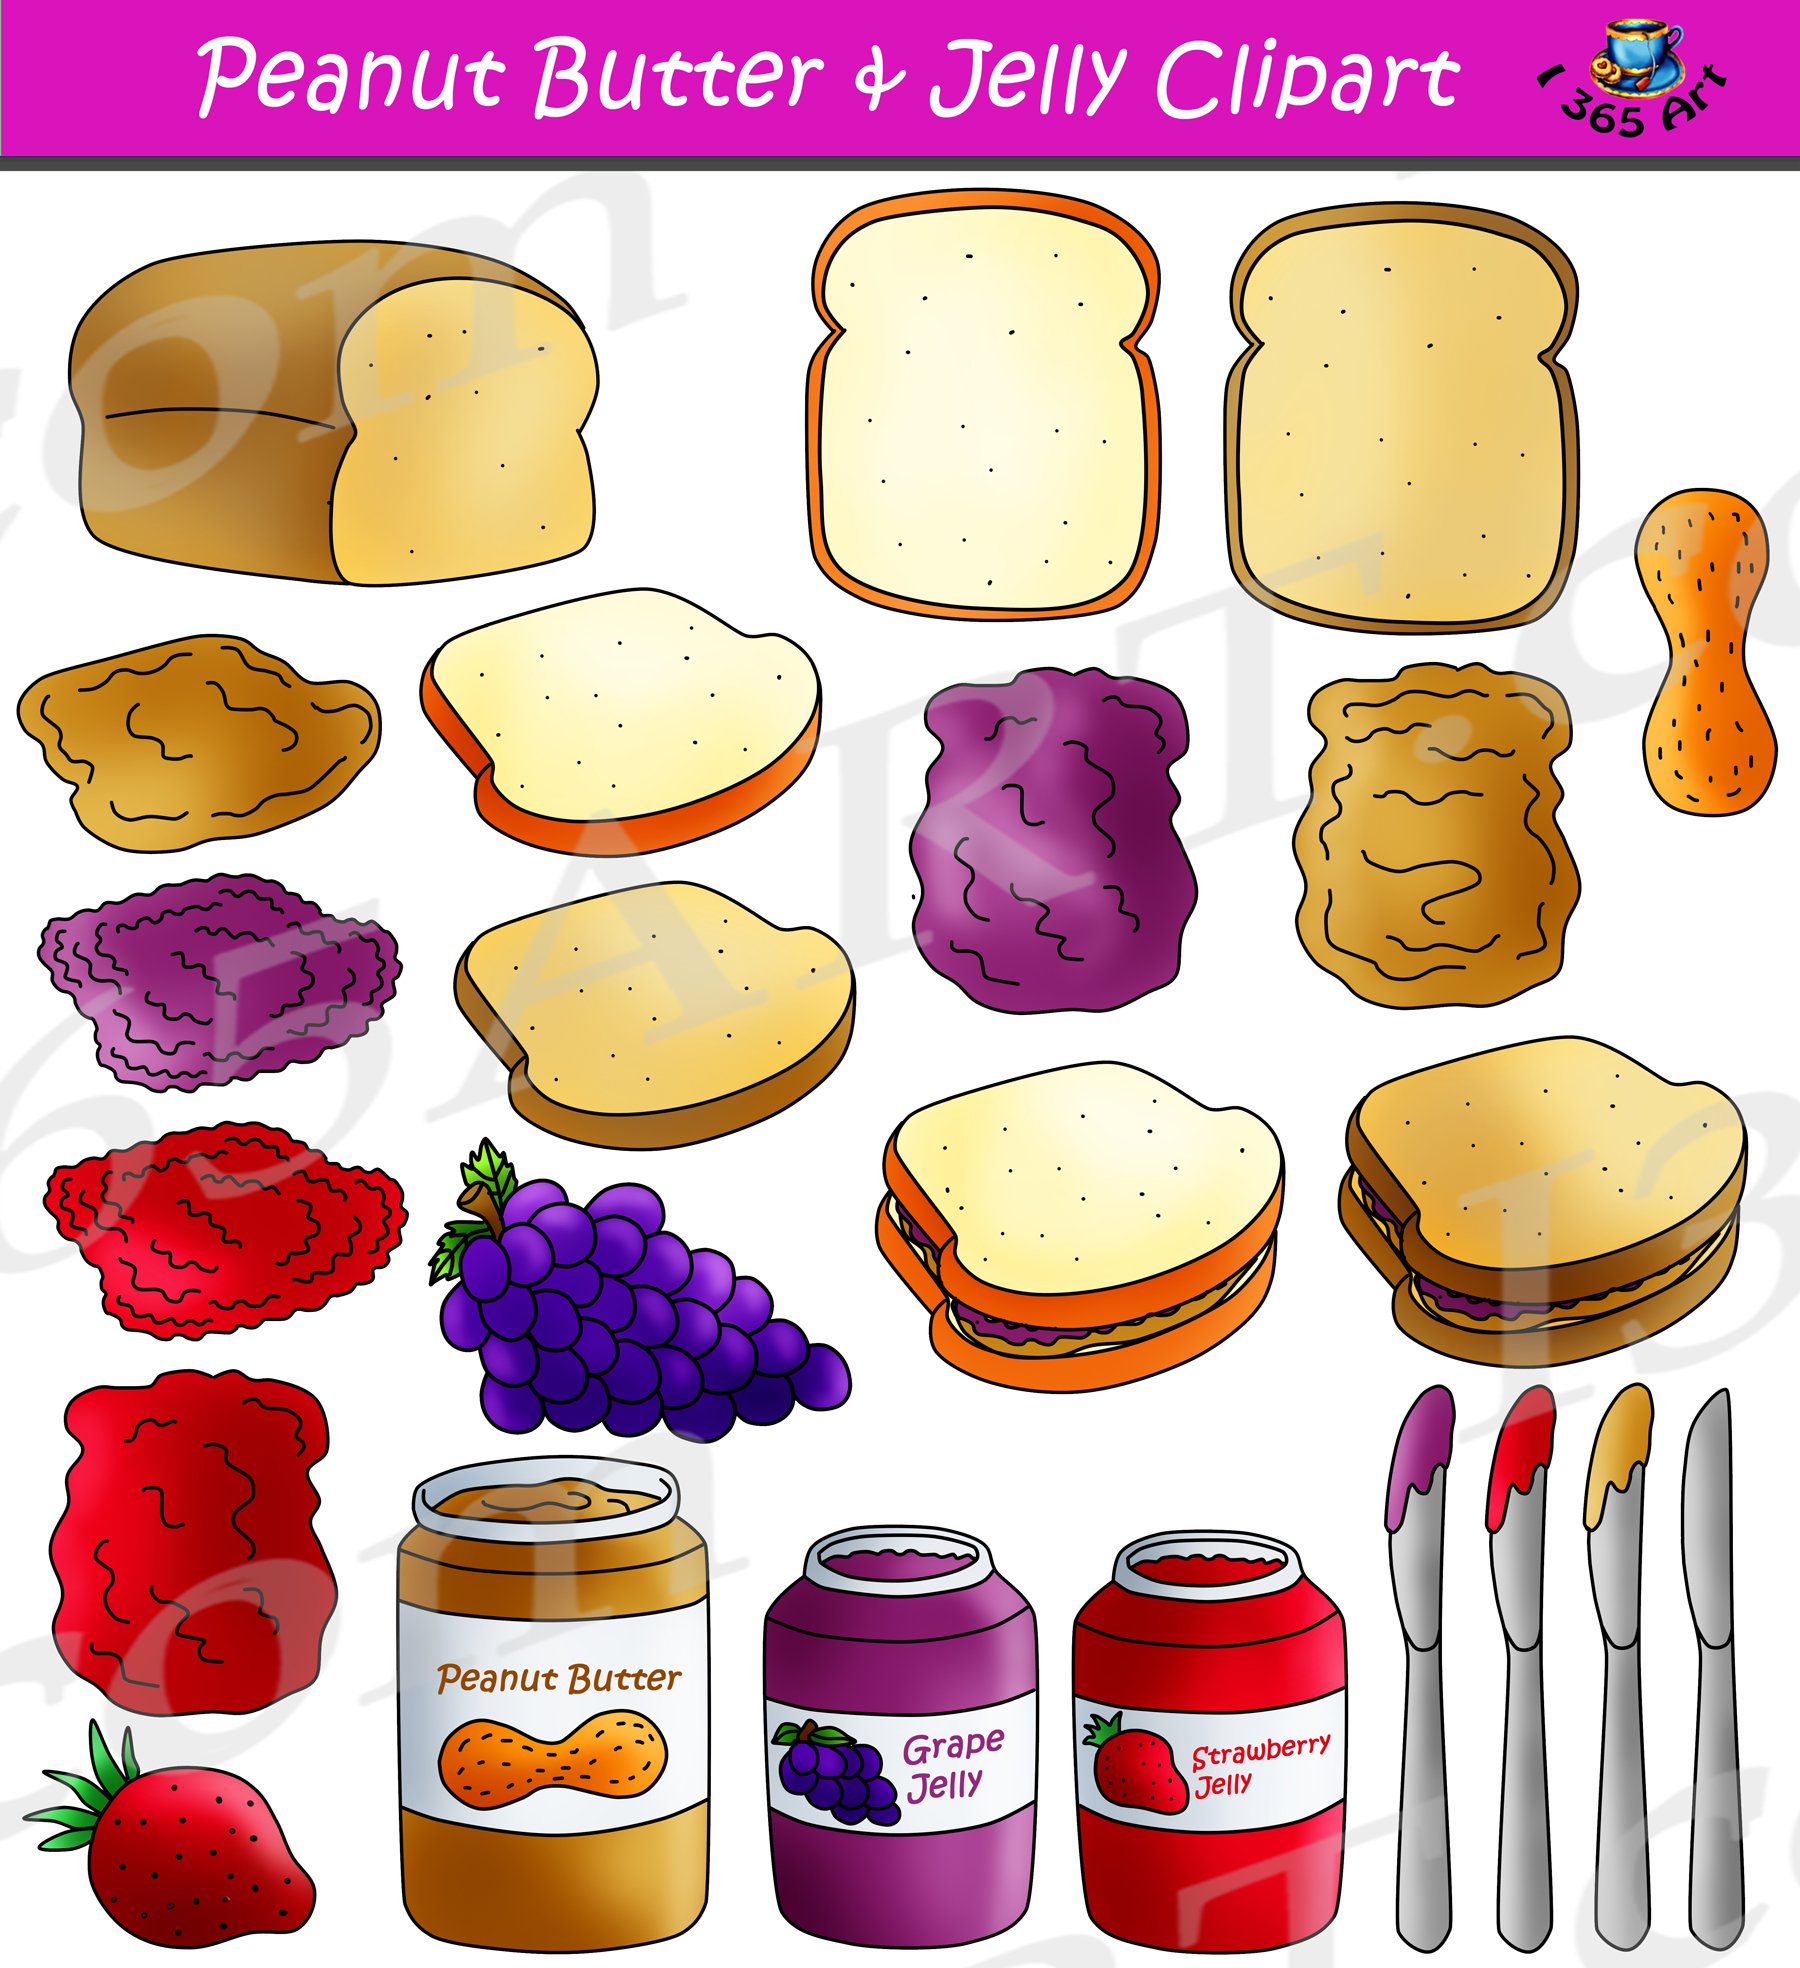 Sandwich clipart peanut butter jelly. Maker graphics commercial download